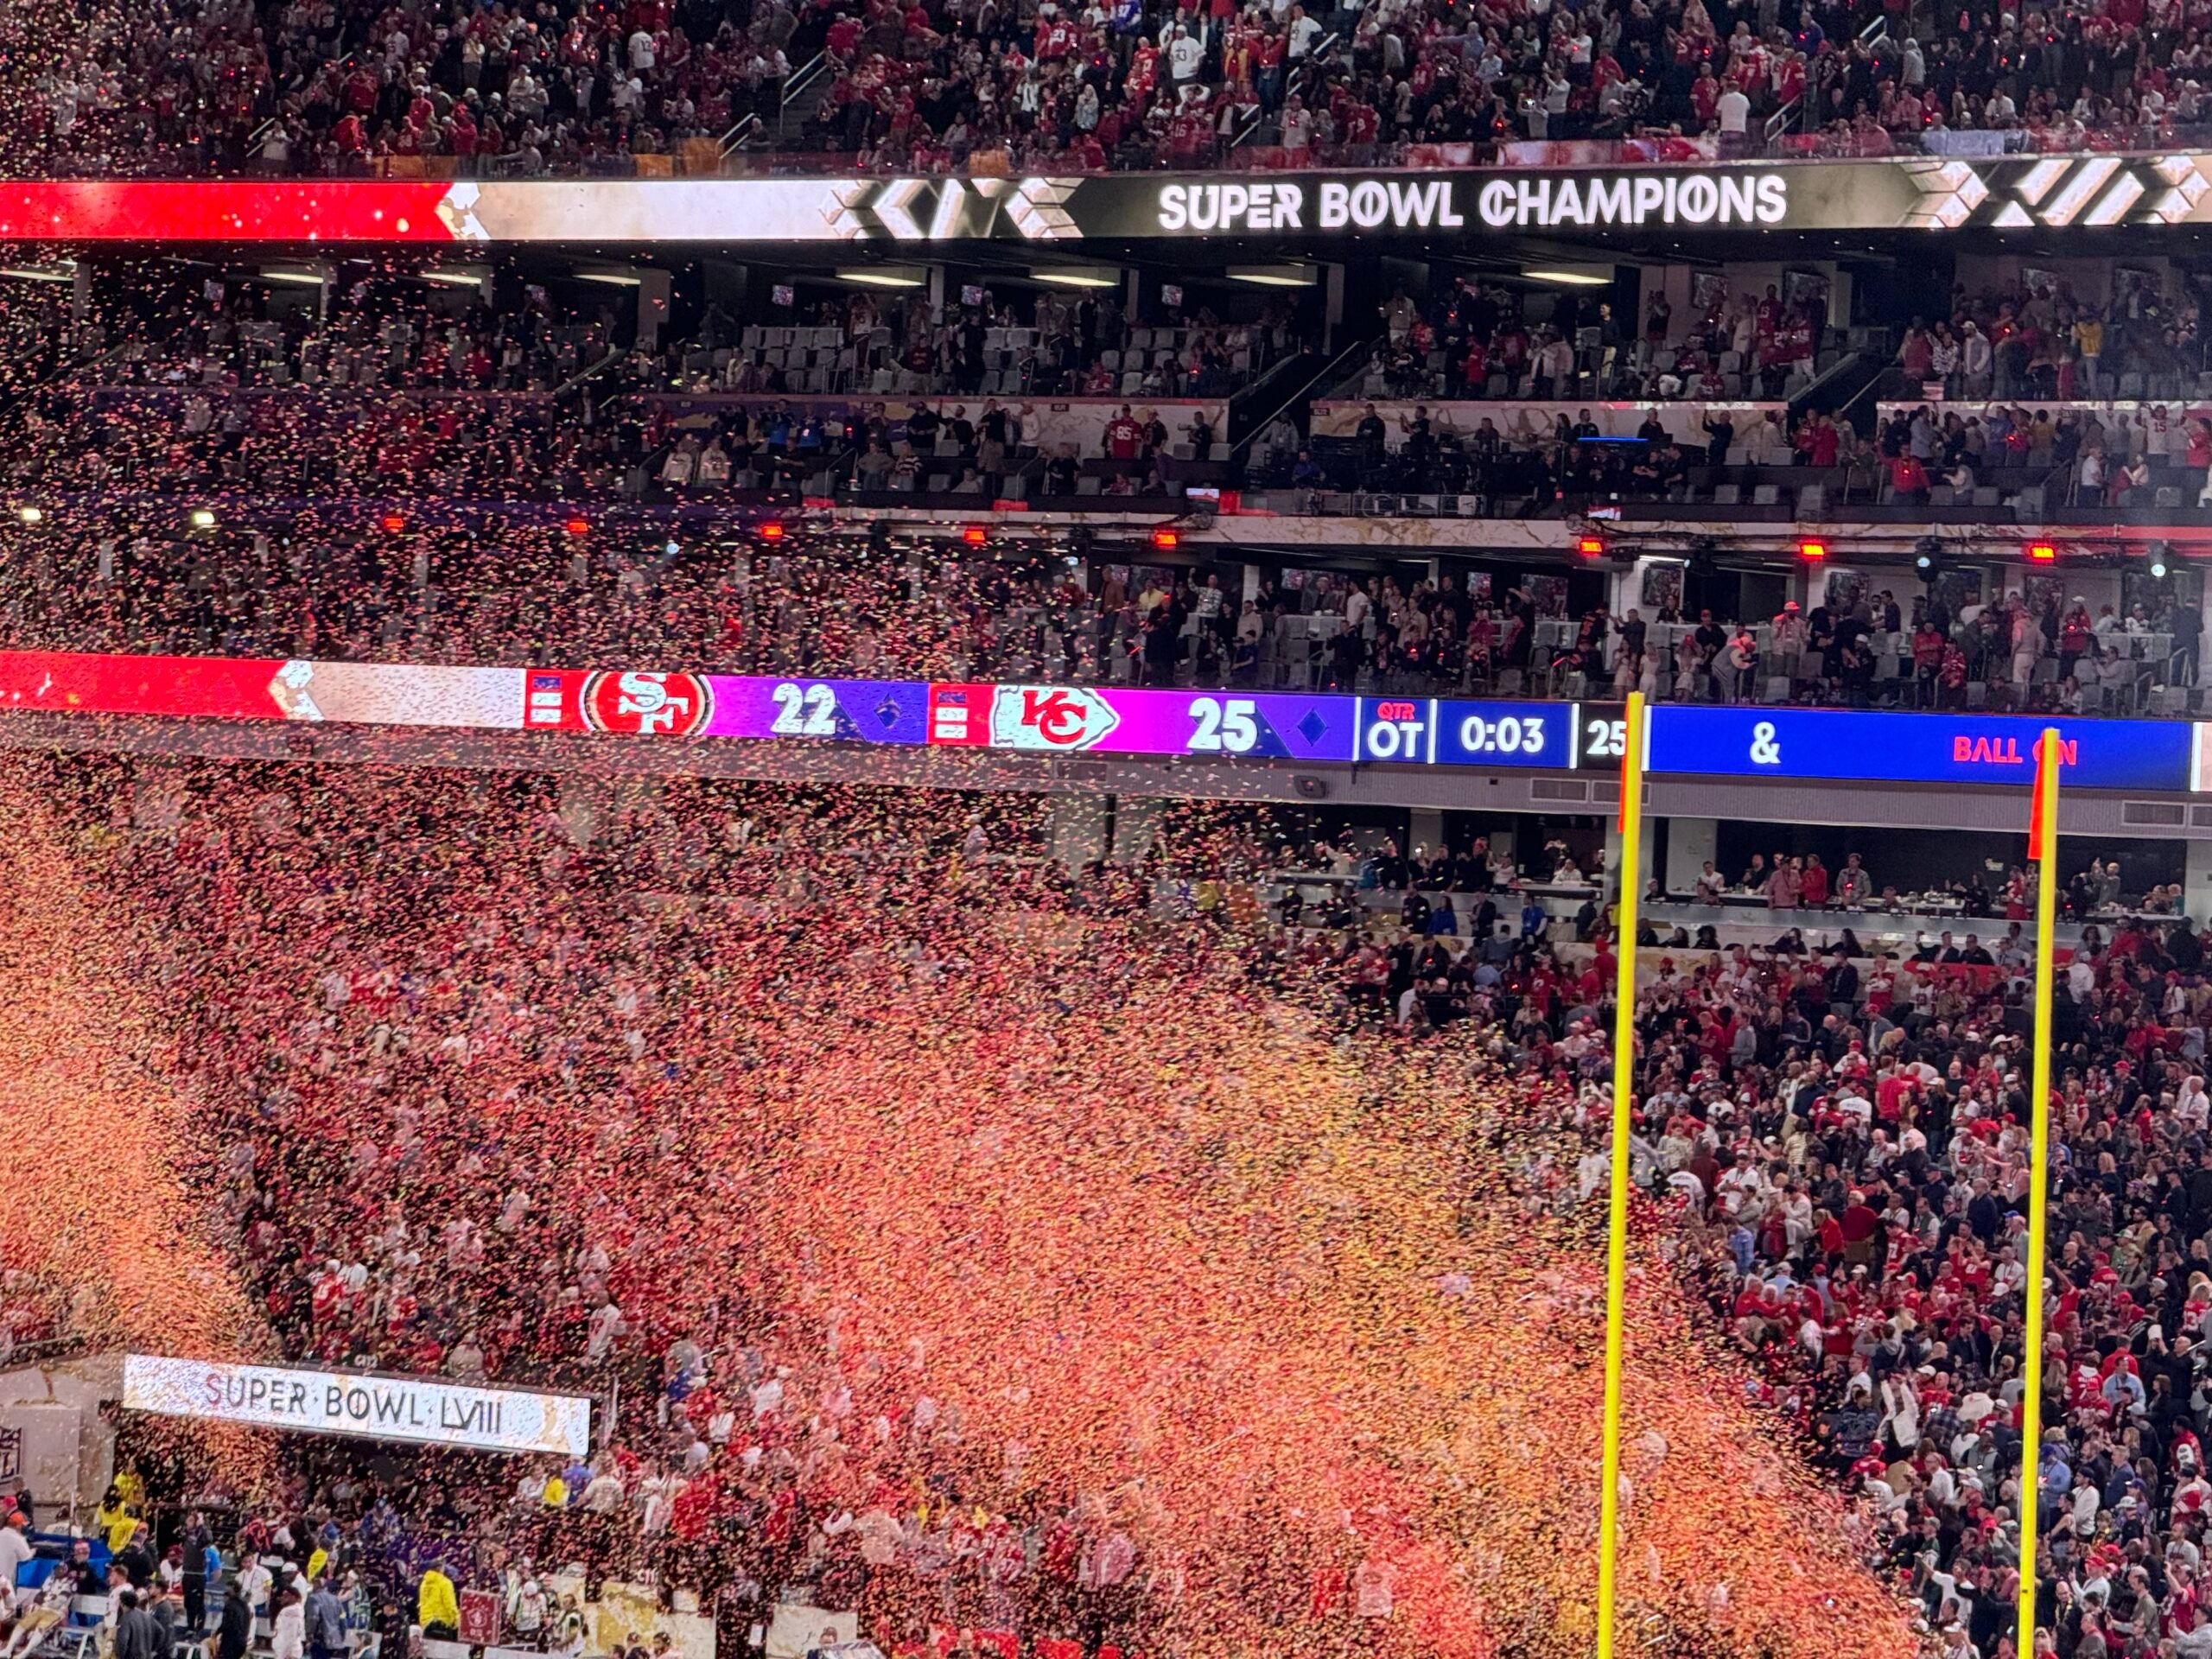 Confetti flies in Allegiant Stadium in Las Vegas after the Chiefs defeat the 49ers 25-22 in overtime in Super Bowl 58. (WISH Photo)